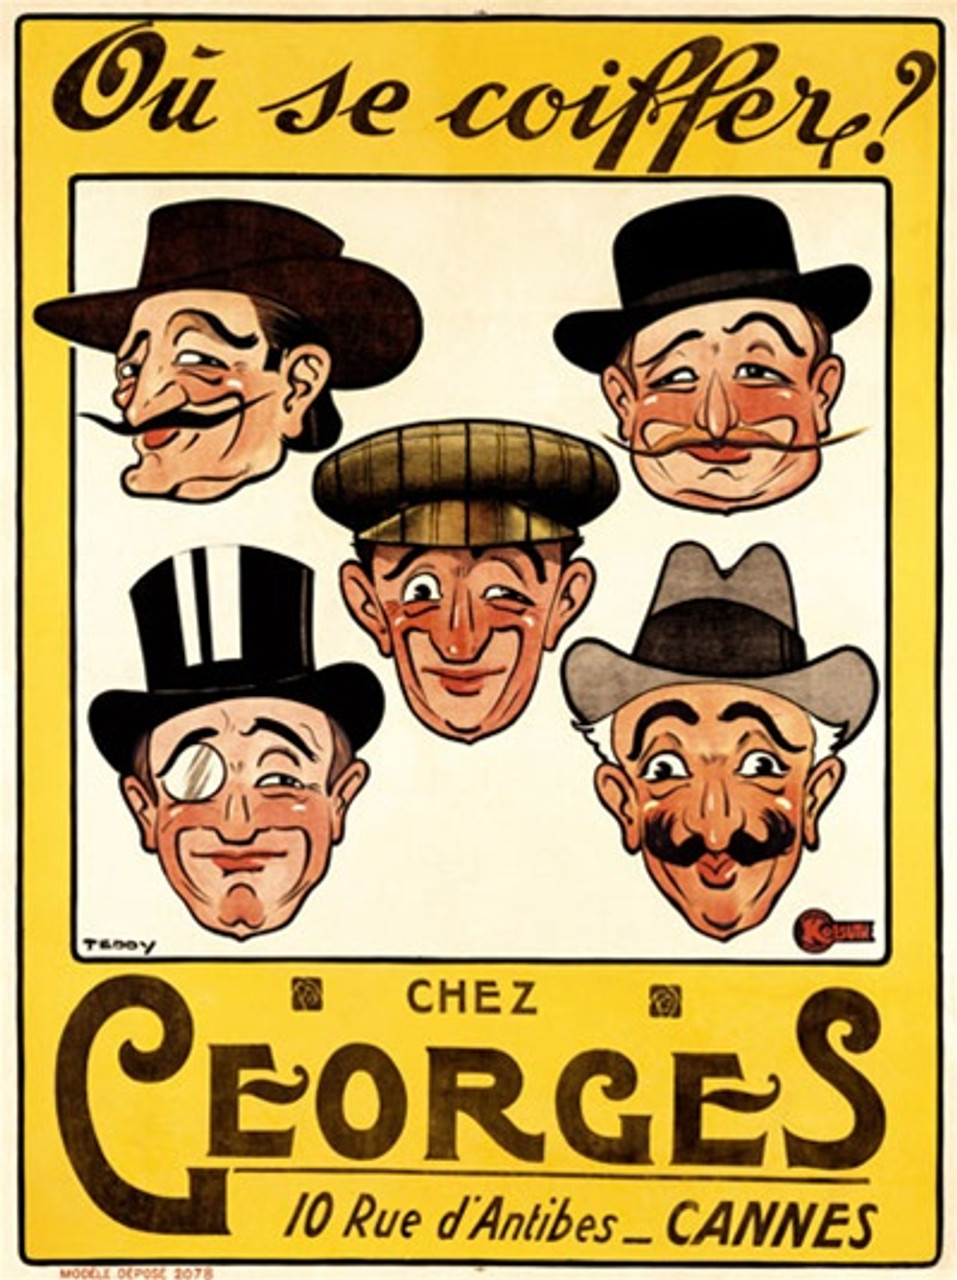 Chez Georges by Teddy 1905 France - Beautiful Vintage Poster Reproductions. This vertical French product poster features 5 mens faces all wearing hats, some with mustaches or monocle with yellow boarder. Giclee Advertising Print. Classic Posters